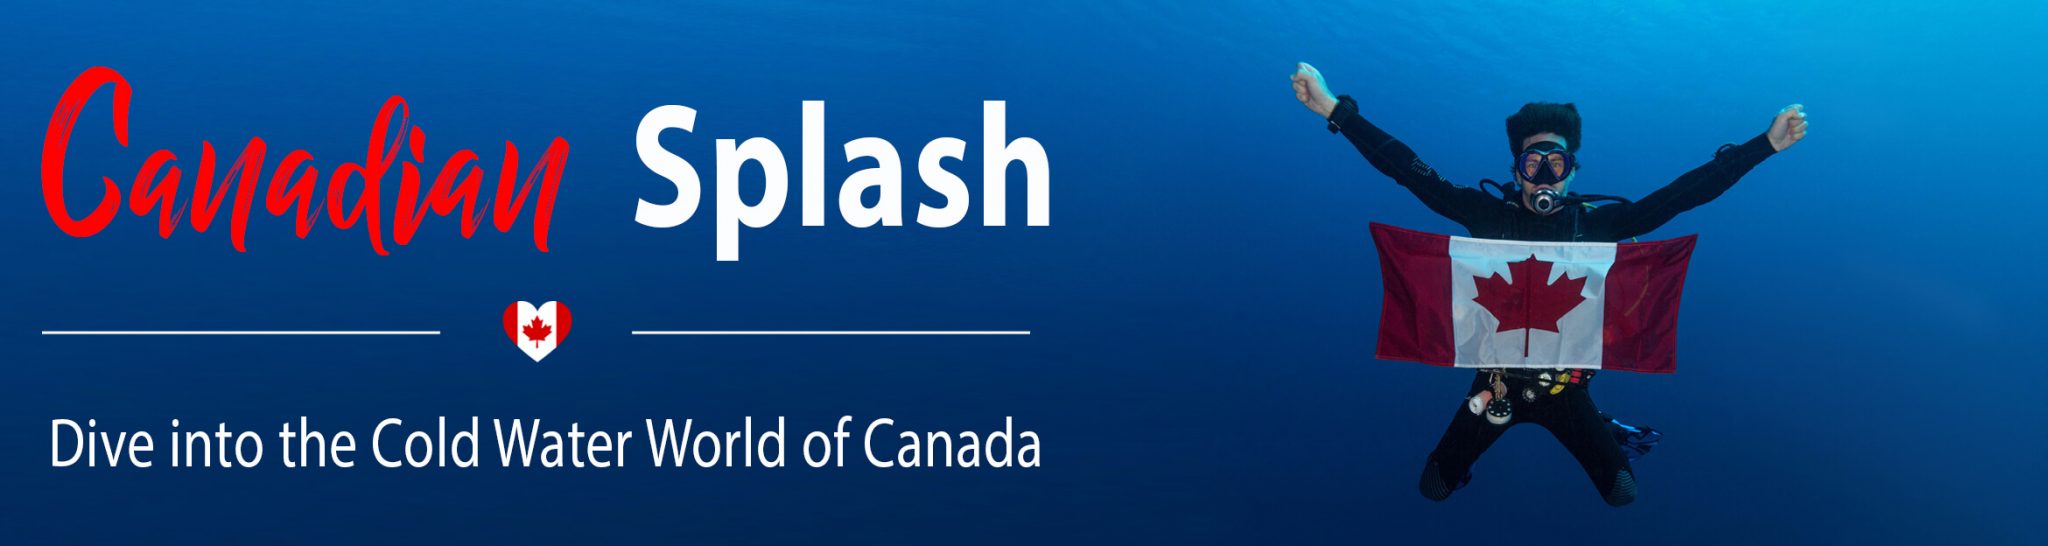 Canadian Splash - Dive into the Cold Water World of Canada